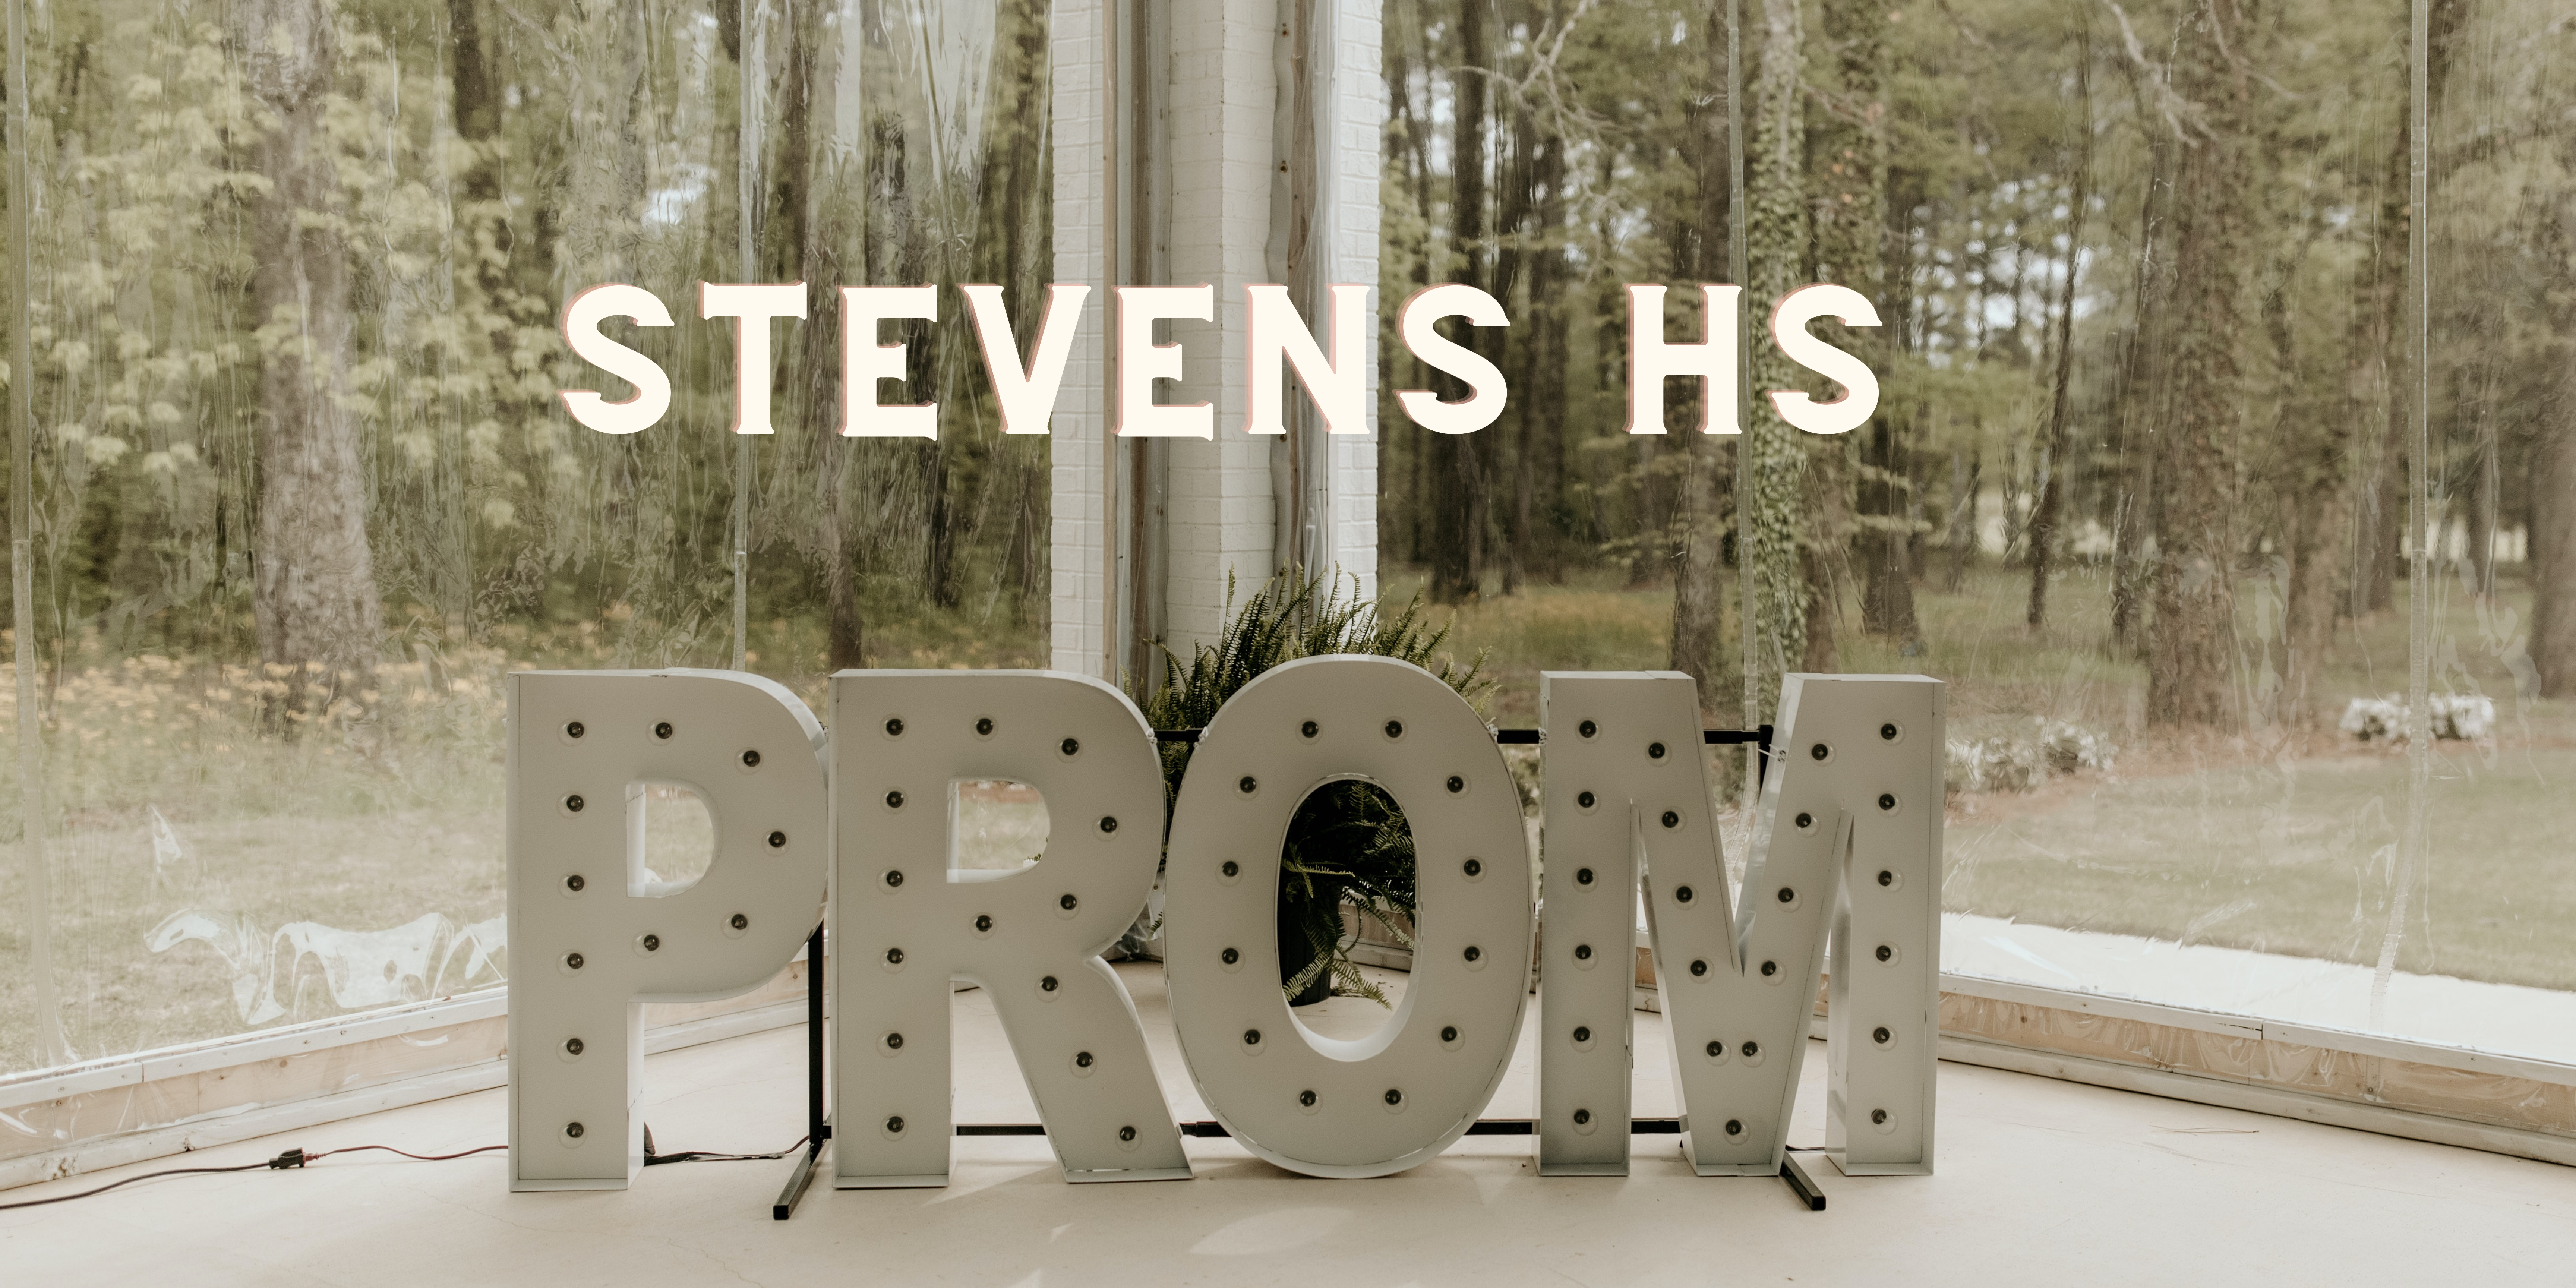 Letters forming the word prom in front of a forest